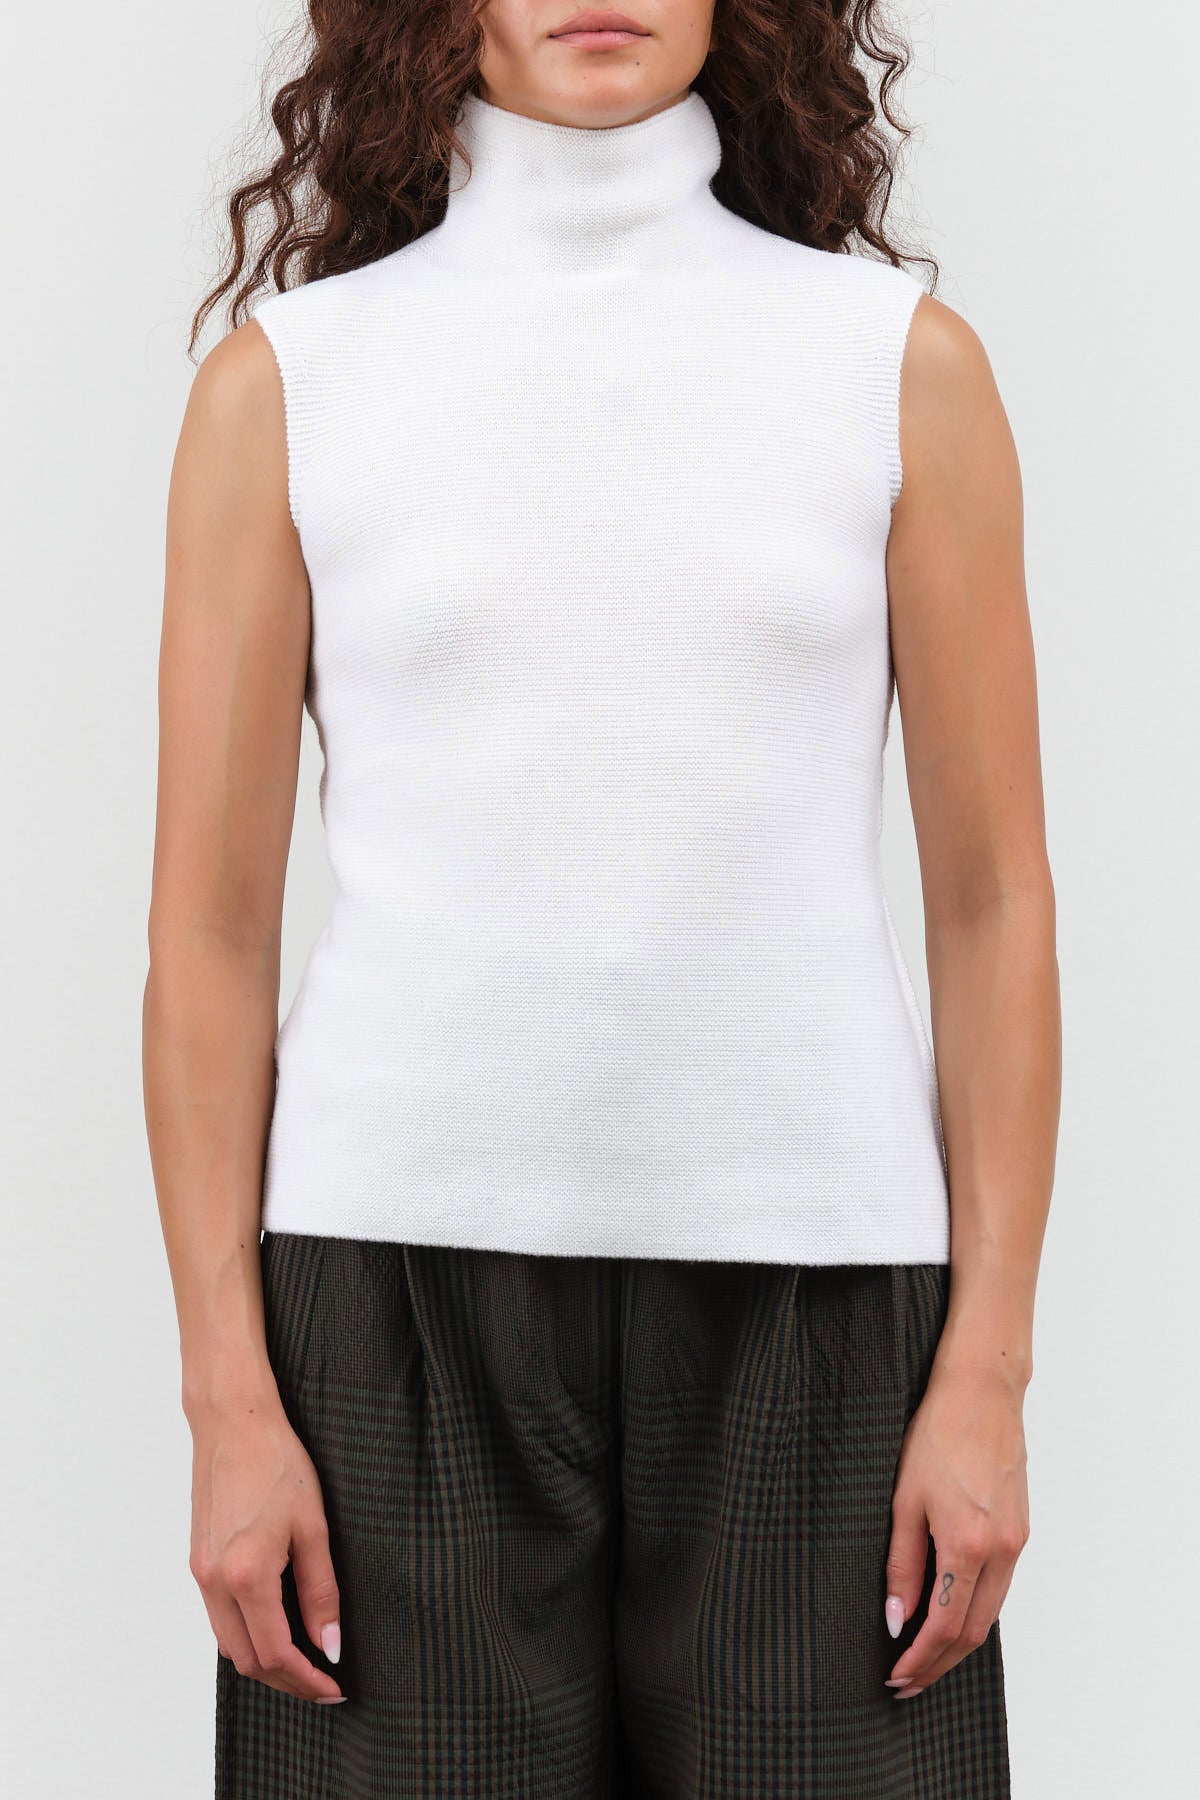 Kewili Top by Christian Wijnants in White